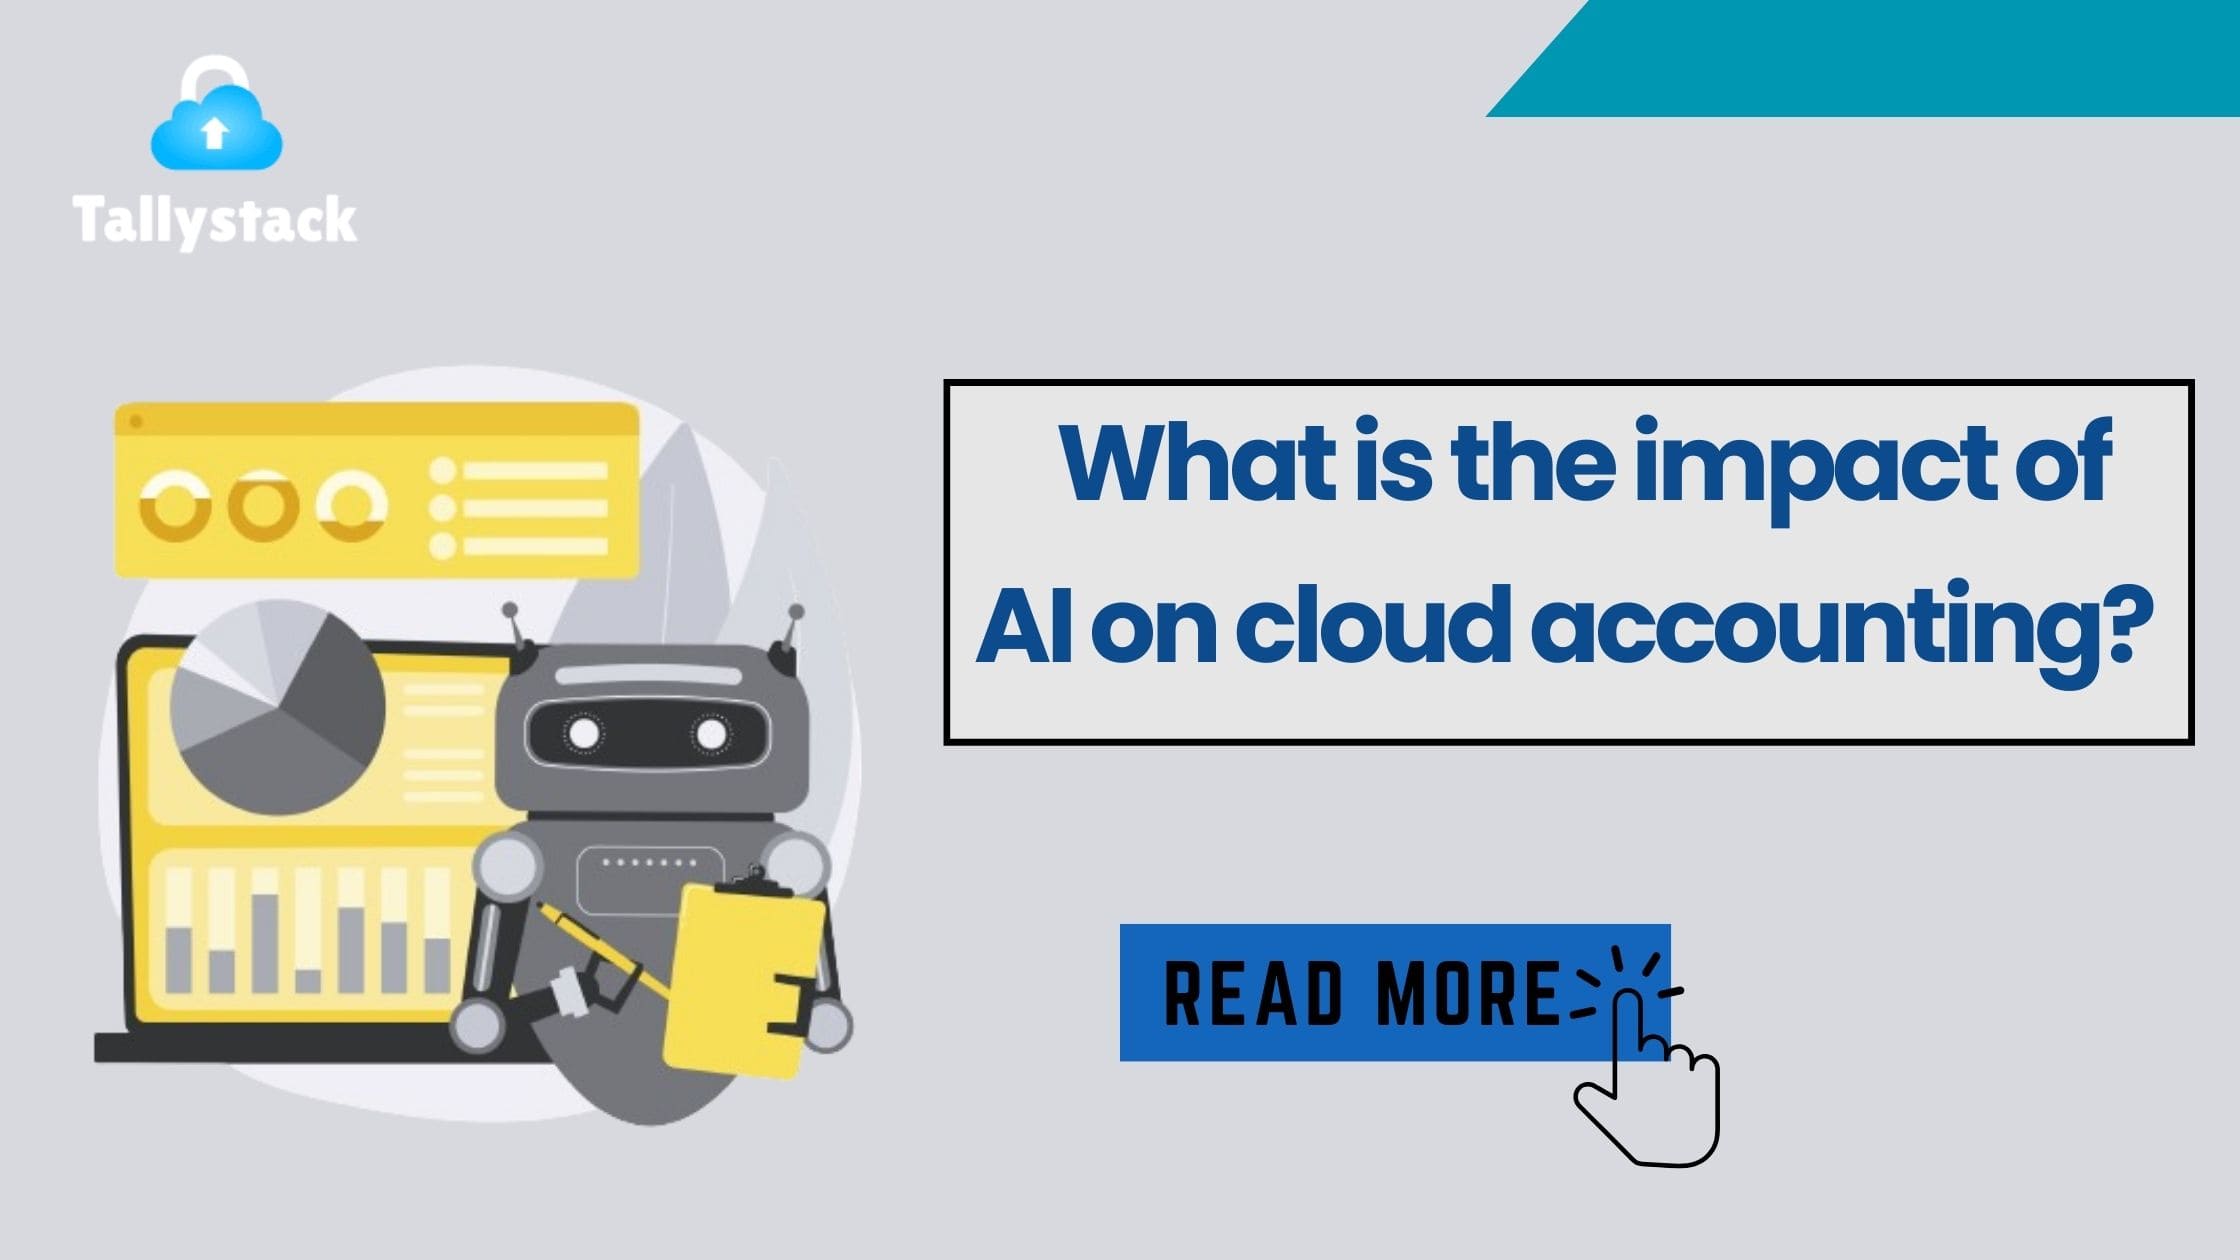 Artificial Intelligence (AI) has been used in cloud accounting in recent years, completely changing how firms handle their finances.